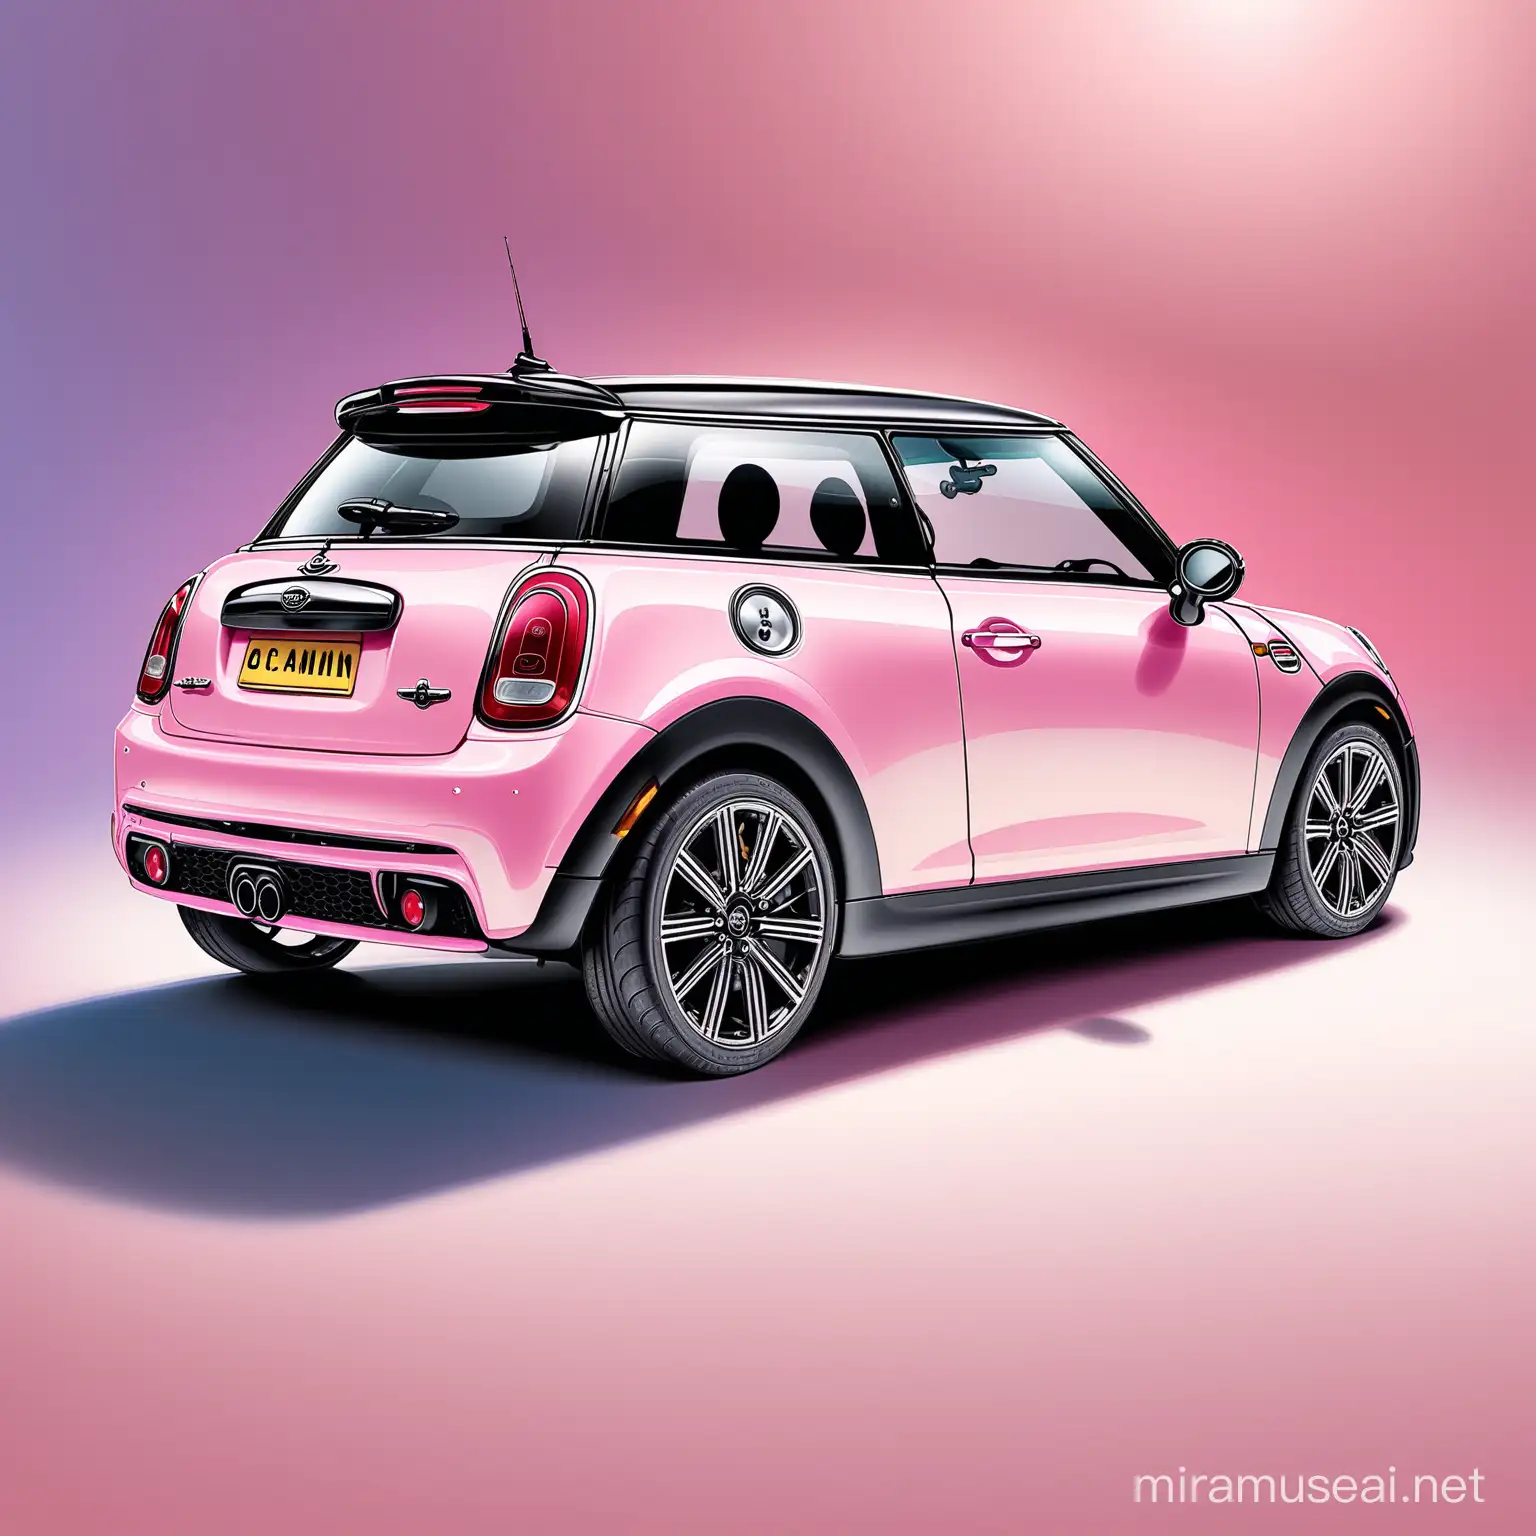 Car country man mini cooper colored in light pink
